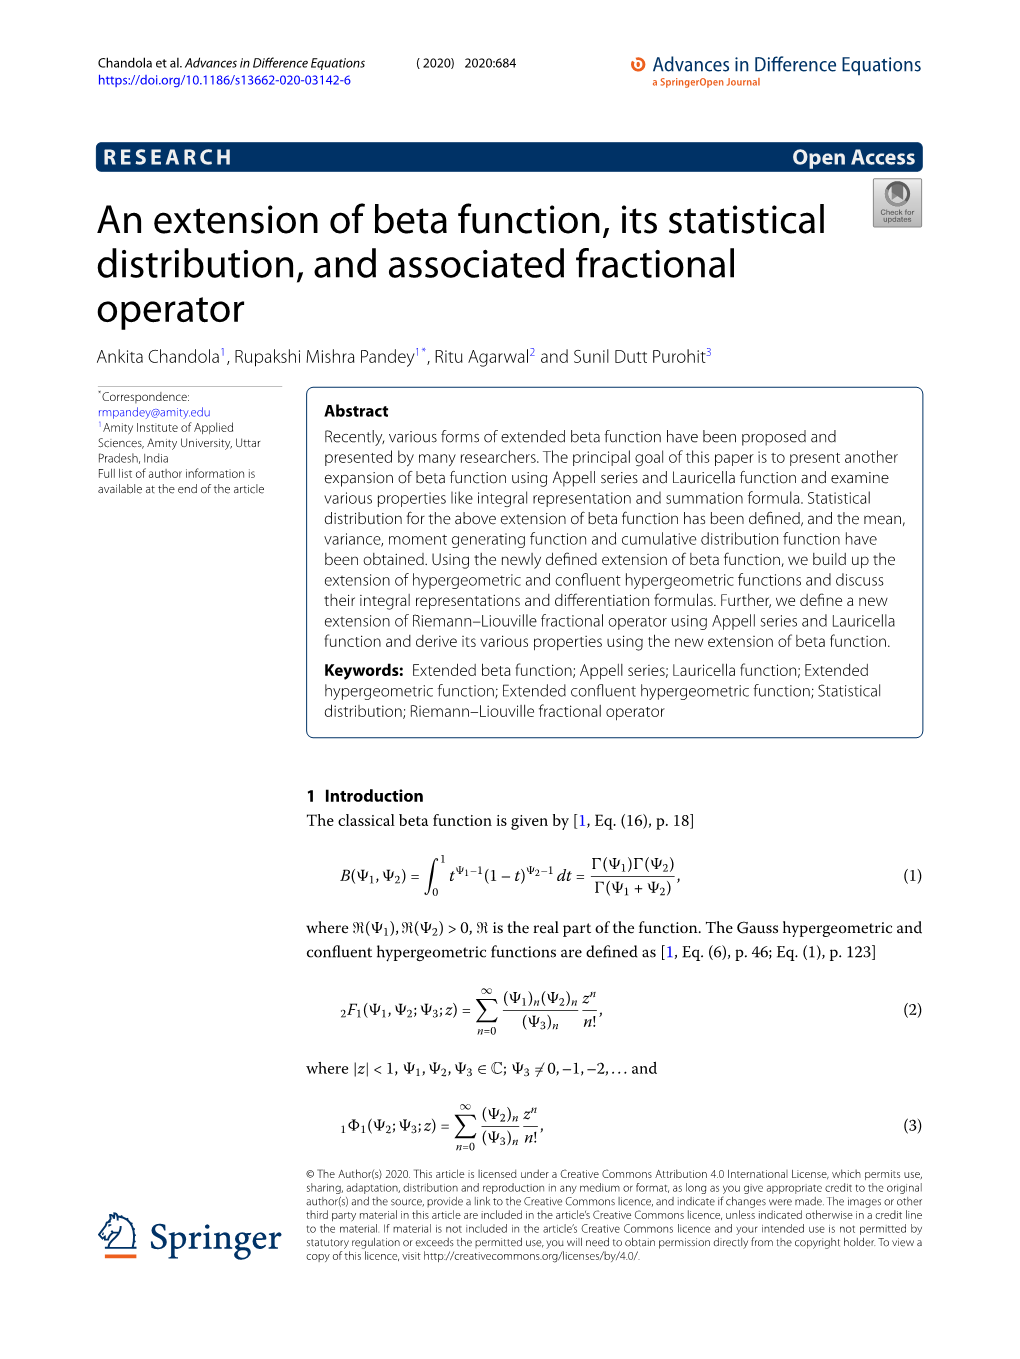 An Extension of Beta Function, Its Statistical Distribution, And